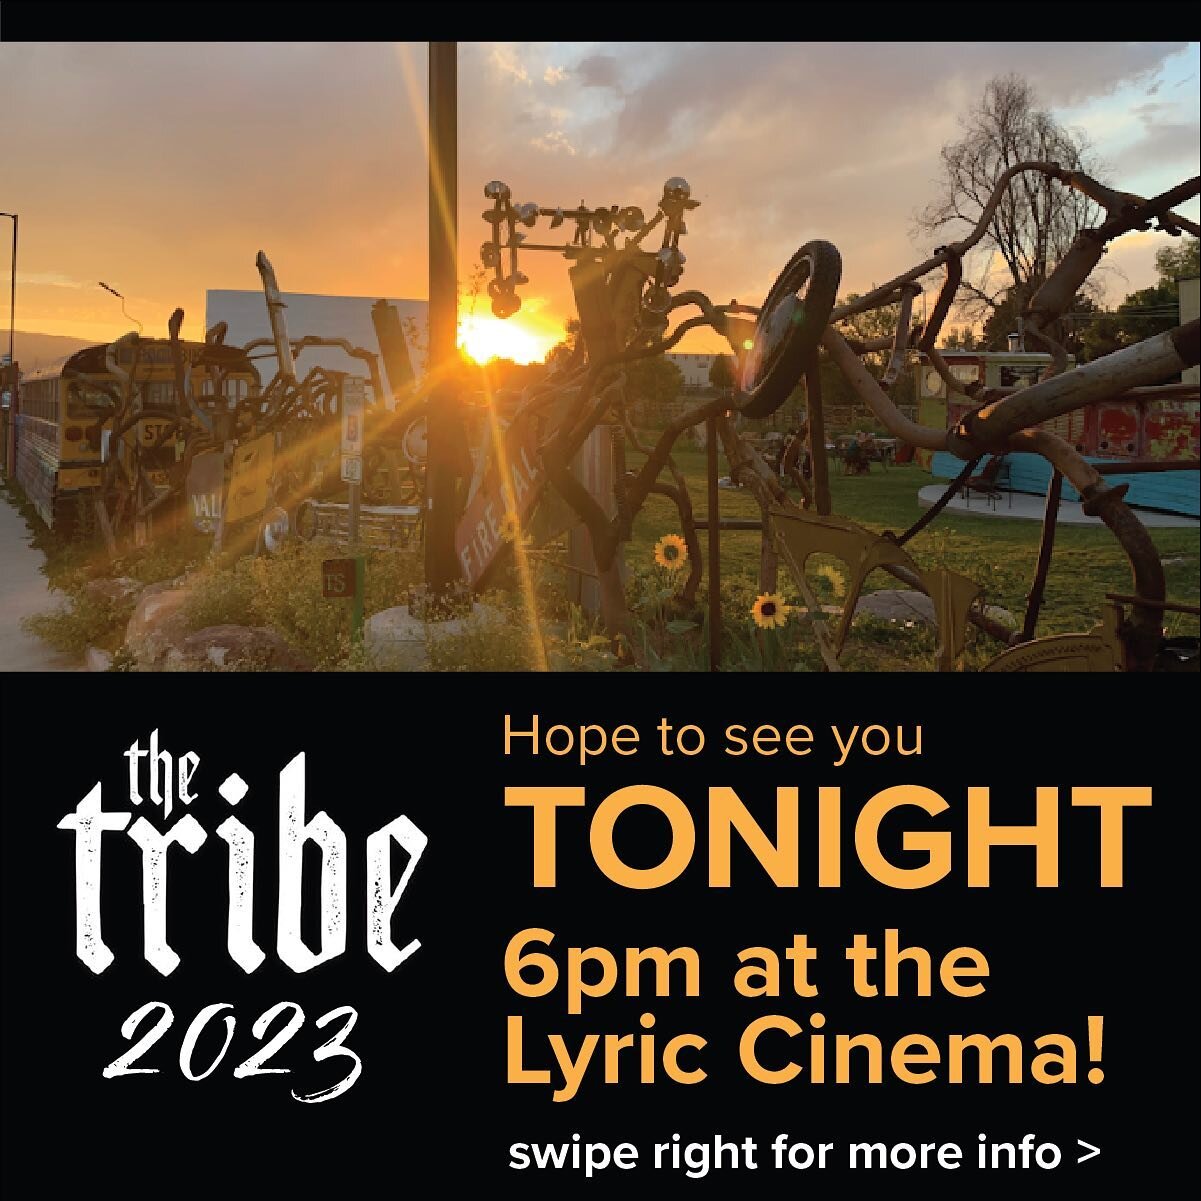 Tonight&rsquo;s the night!!! Hope to see you at 6pm at the Lyric Cinema Cafe!! Please read policies and parking suggestions. Biking encouraged! Whose excited to hang?! Drop a comment if you are psyched!